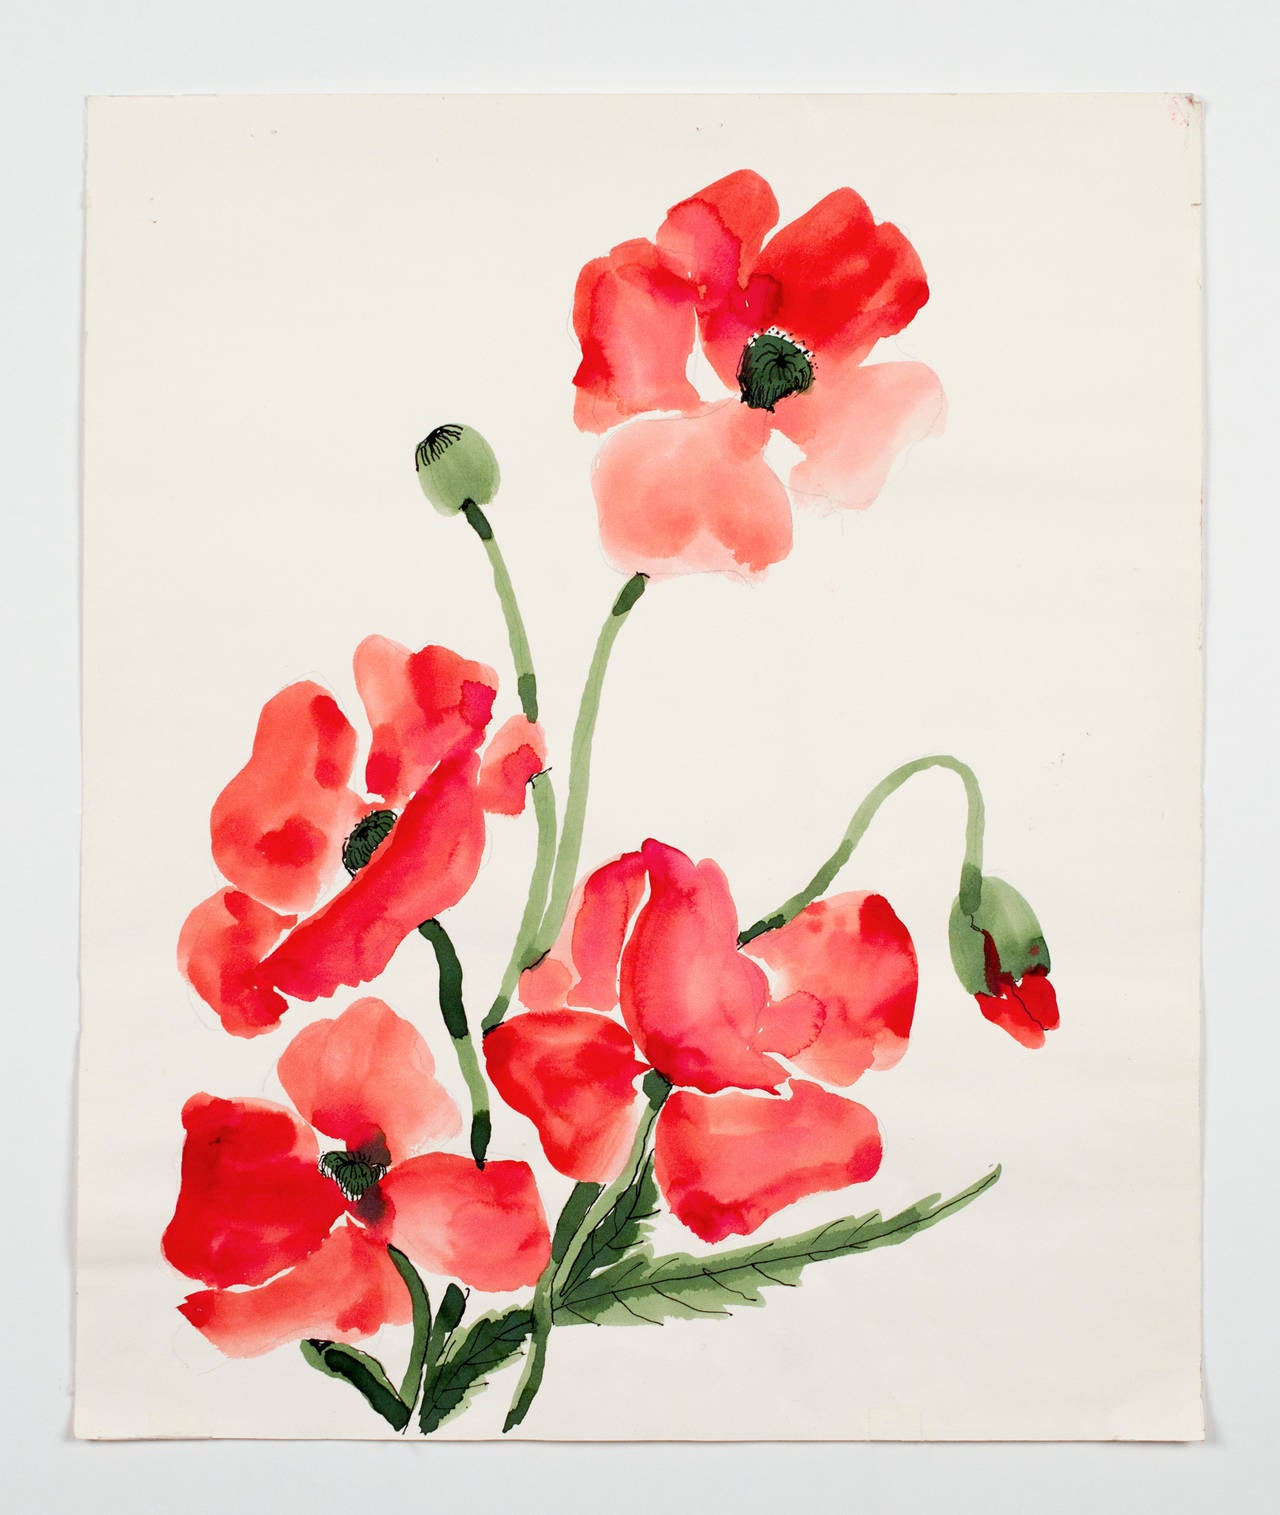 Poppies, from the "Florals" series - Painting by Vera Neumann